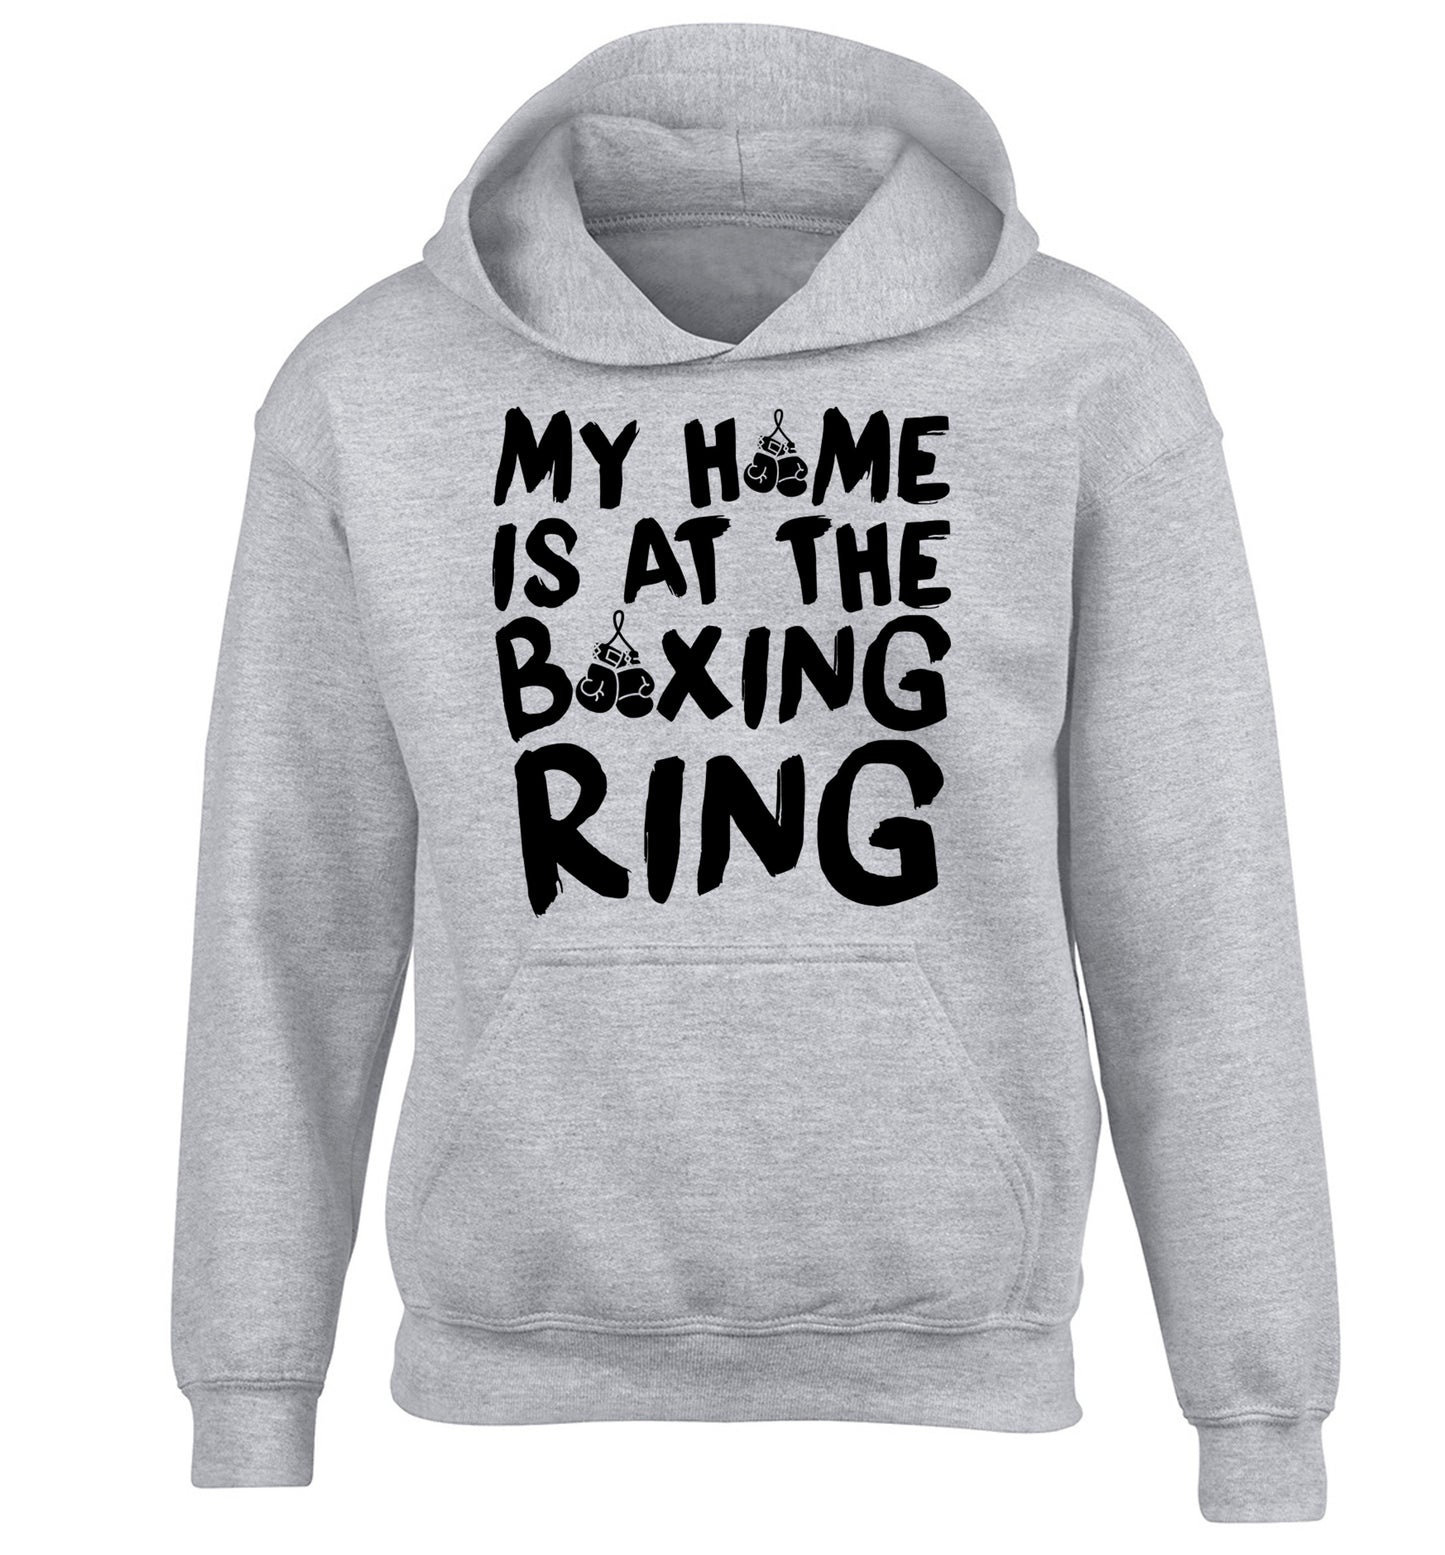 My home is at the boxing ring children's grey hoodie 12-14 Years